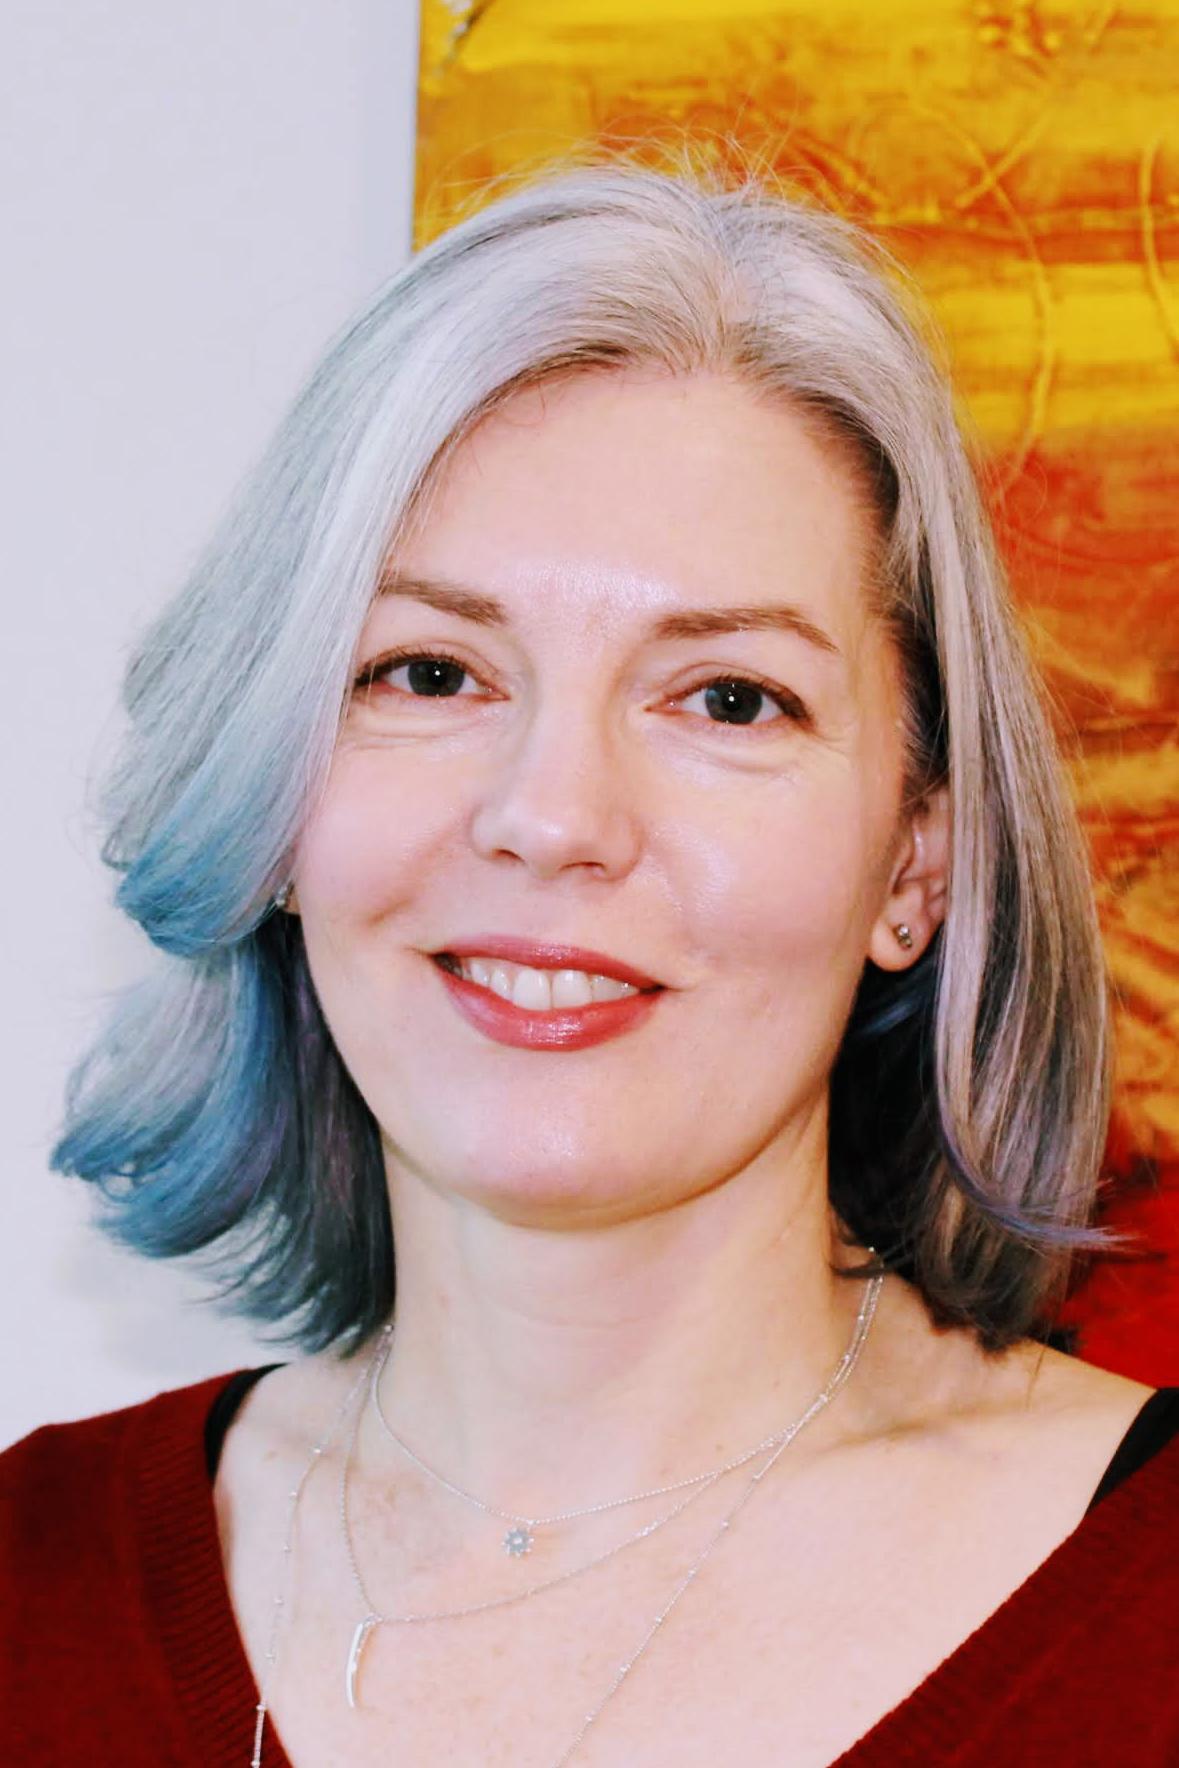 Maggie Cummings, a white woman with white hair, wearing red lipstick and a red shirt.